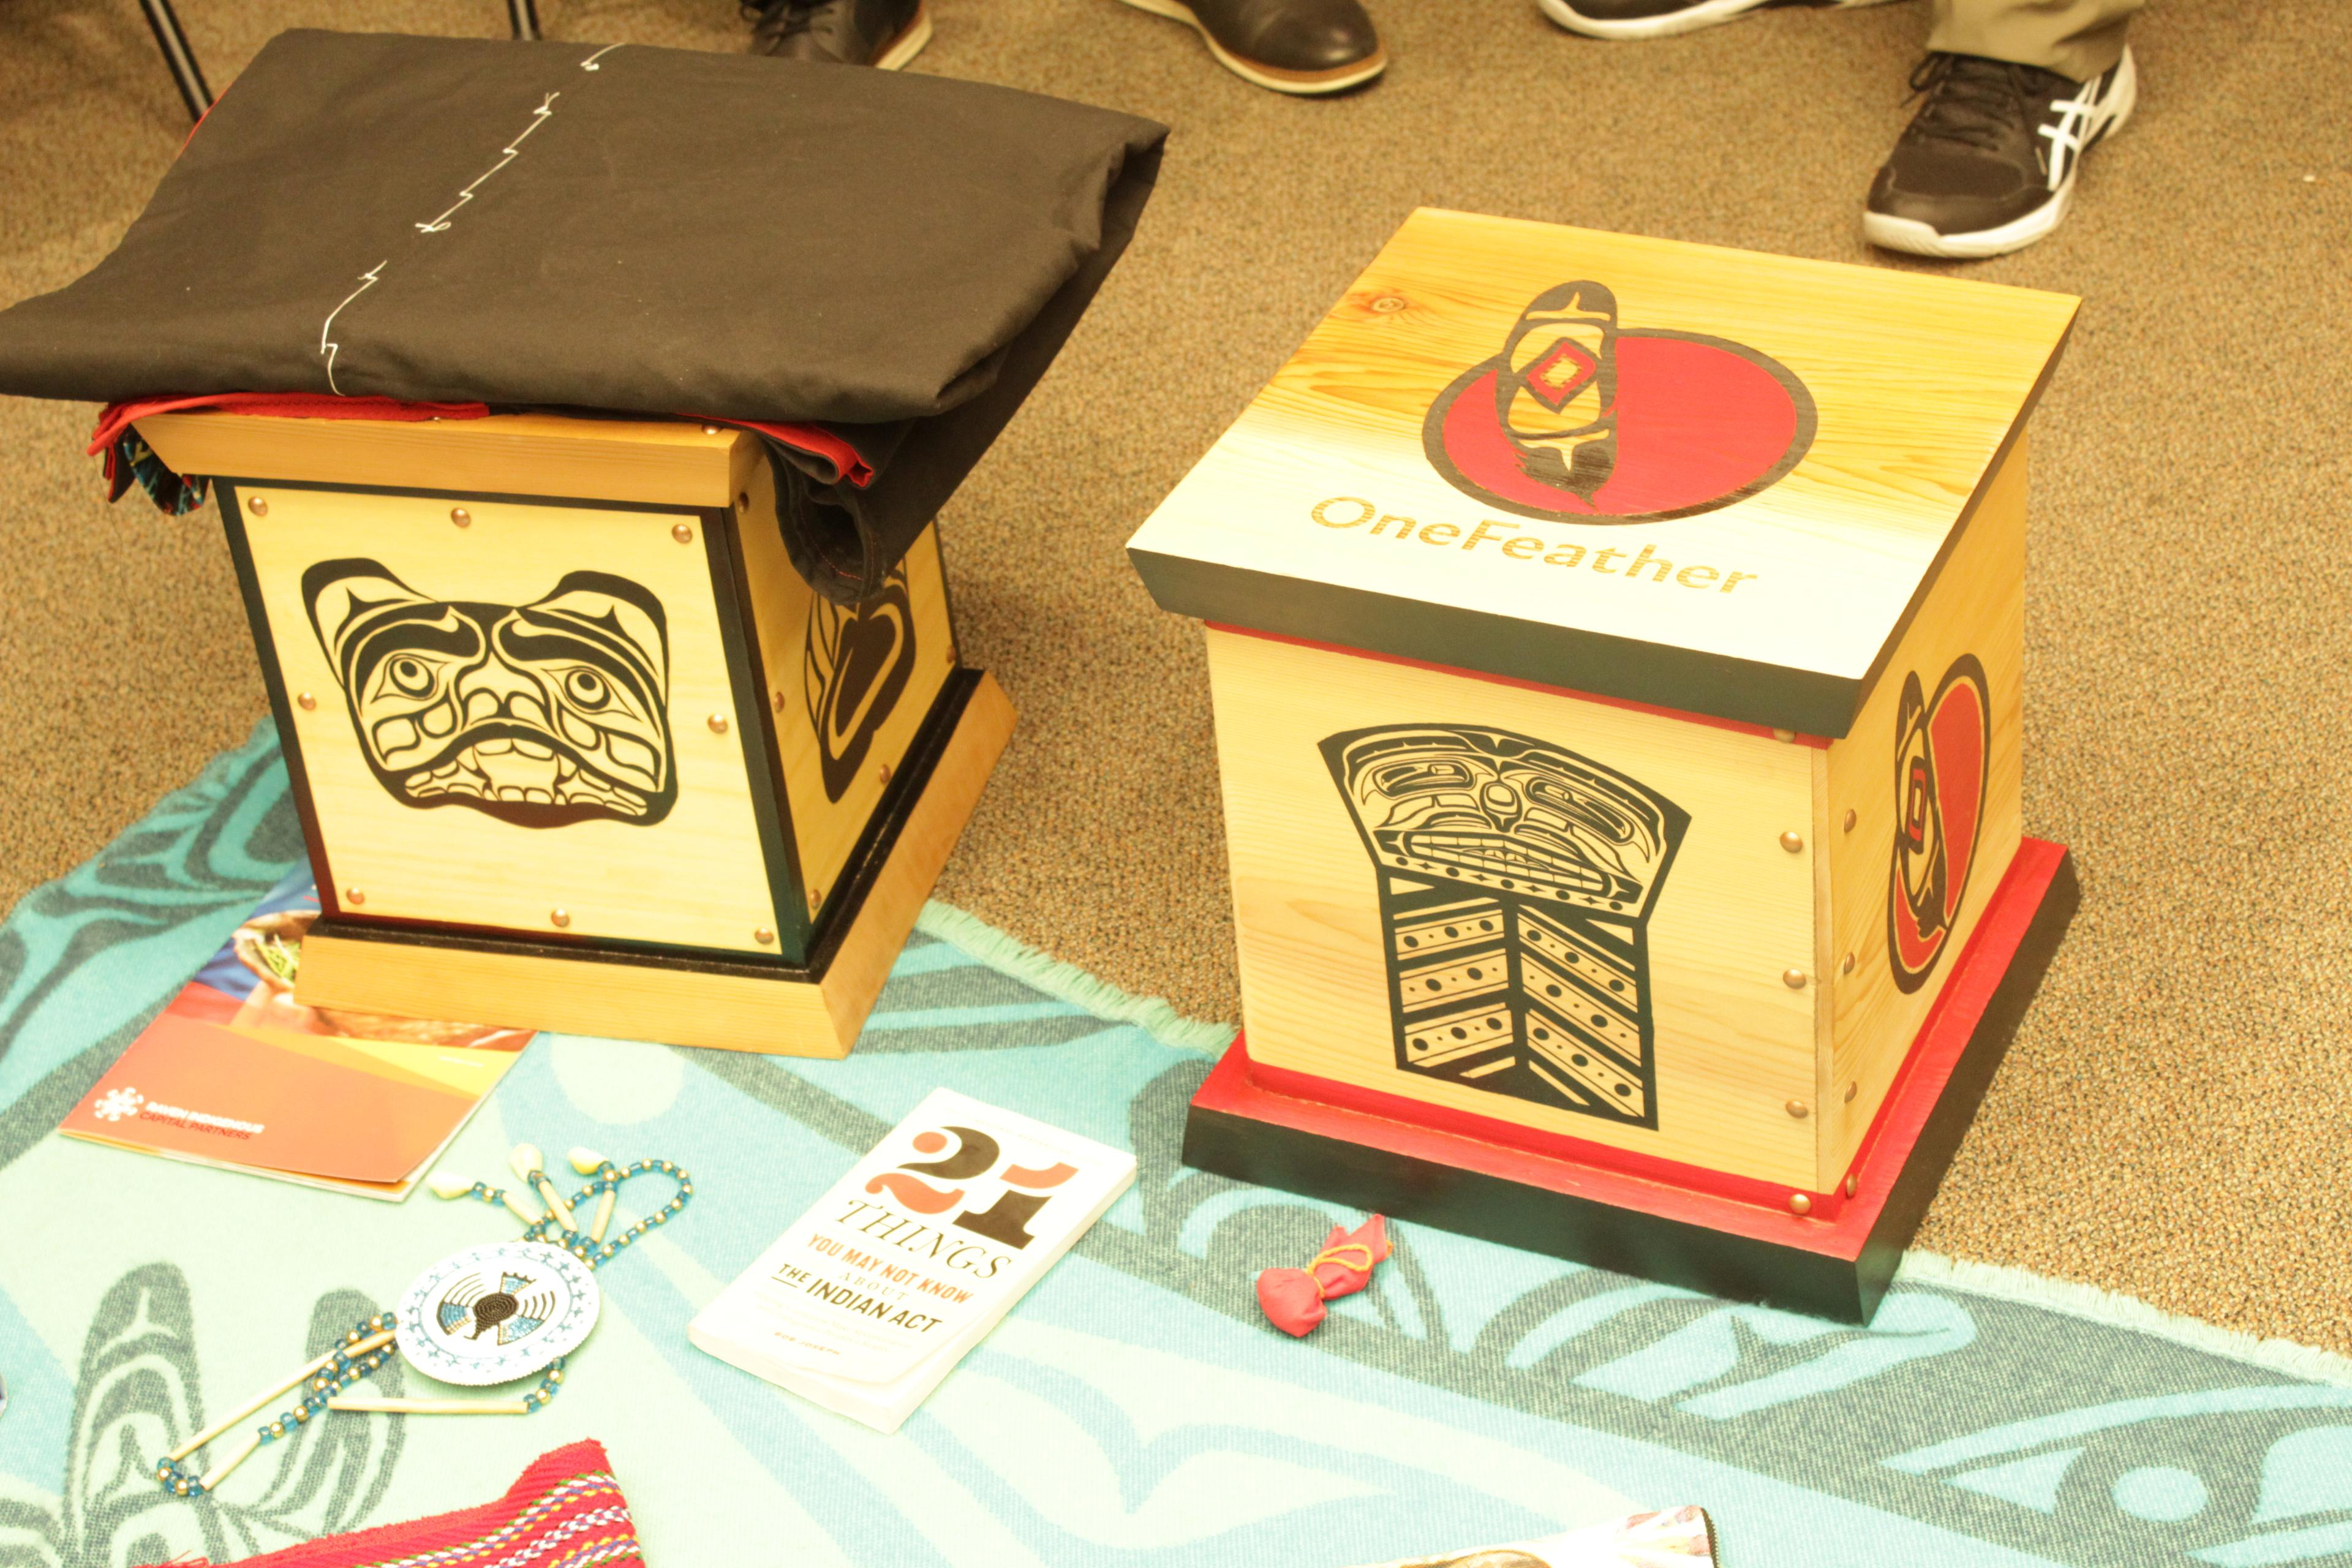 Handmade treasure chests by Shawn Decaire 